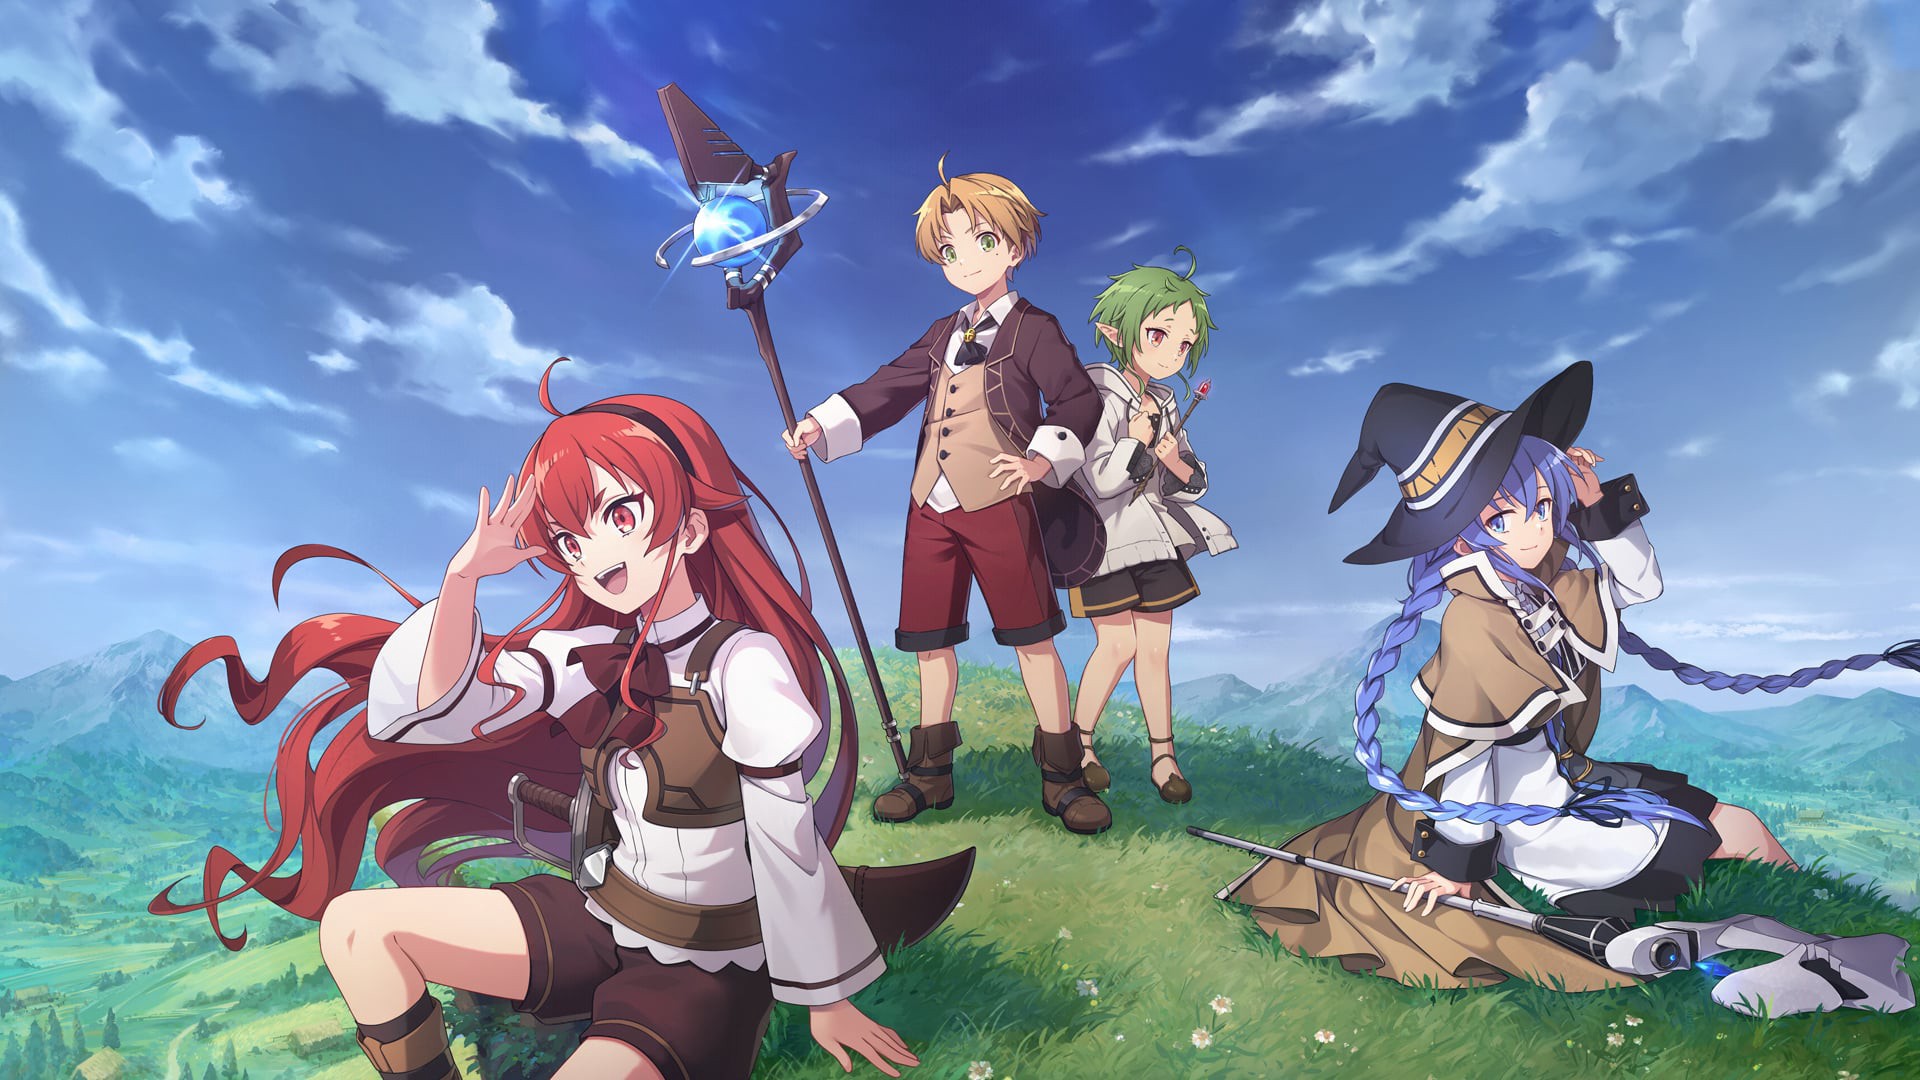 Think You Know Everything About Mushoku Tensei? Take This Quiz to Find Out